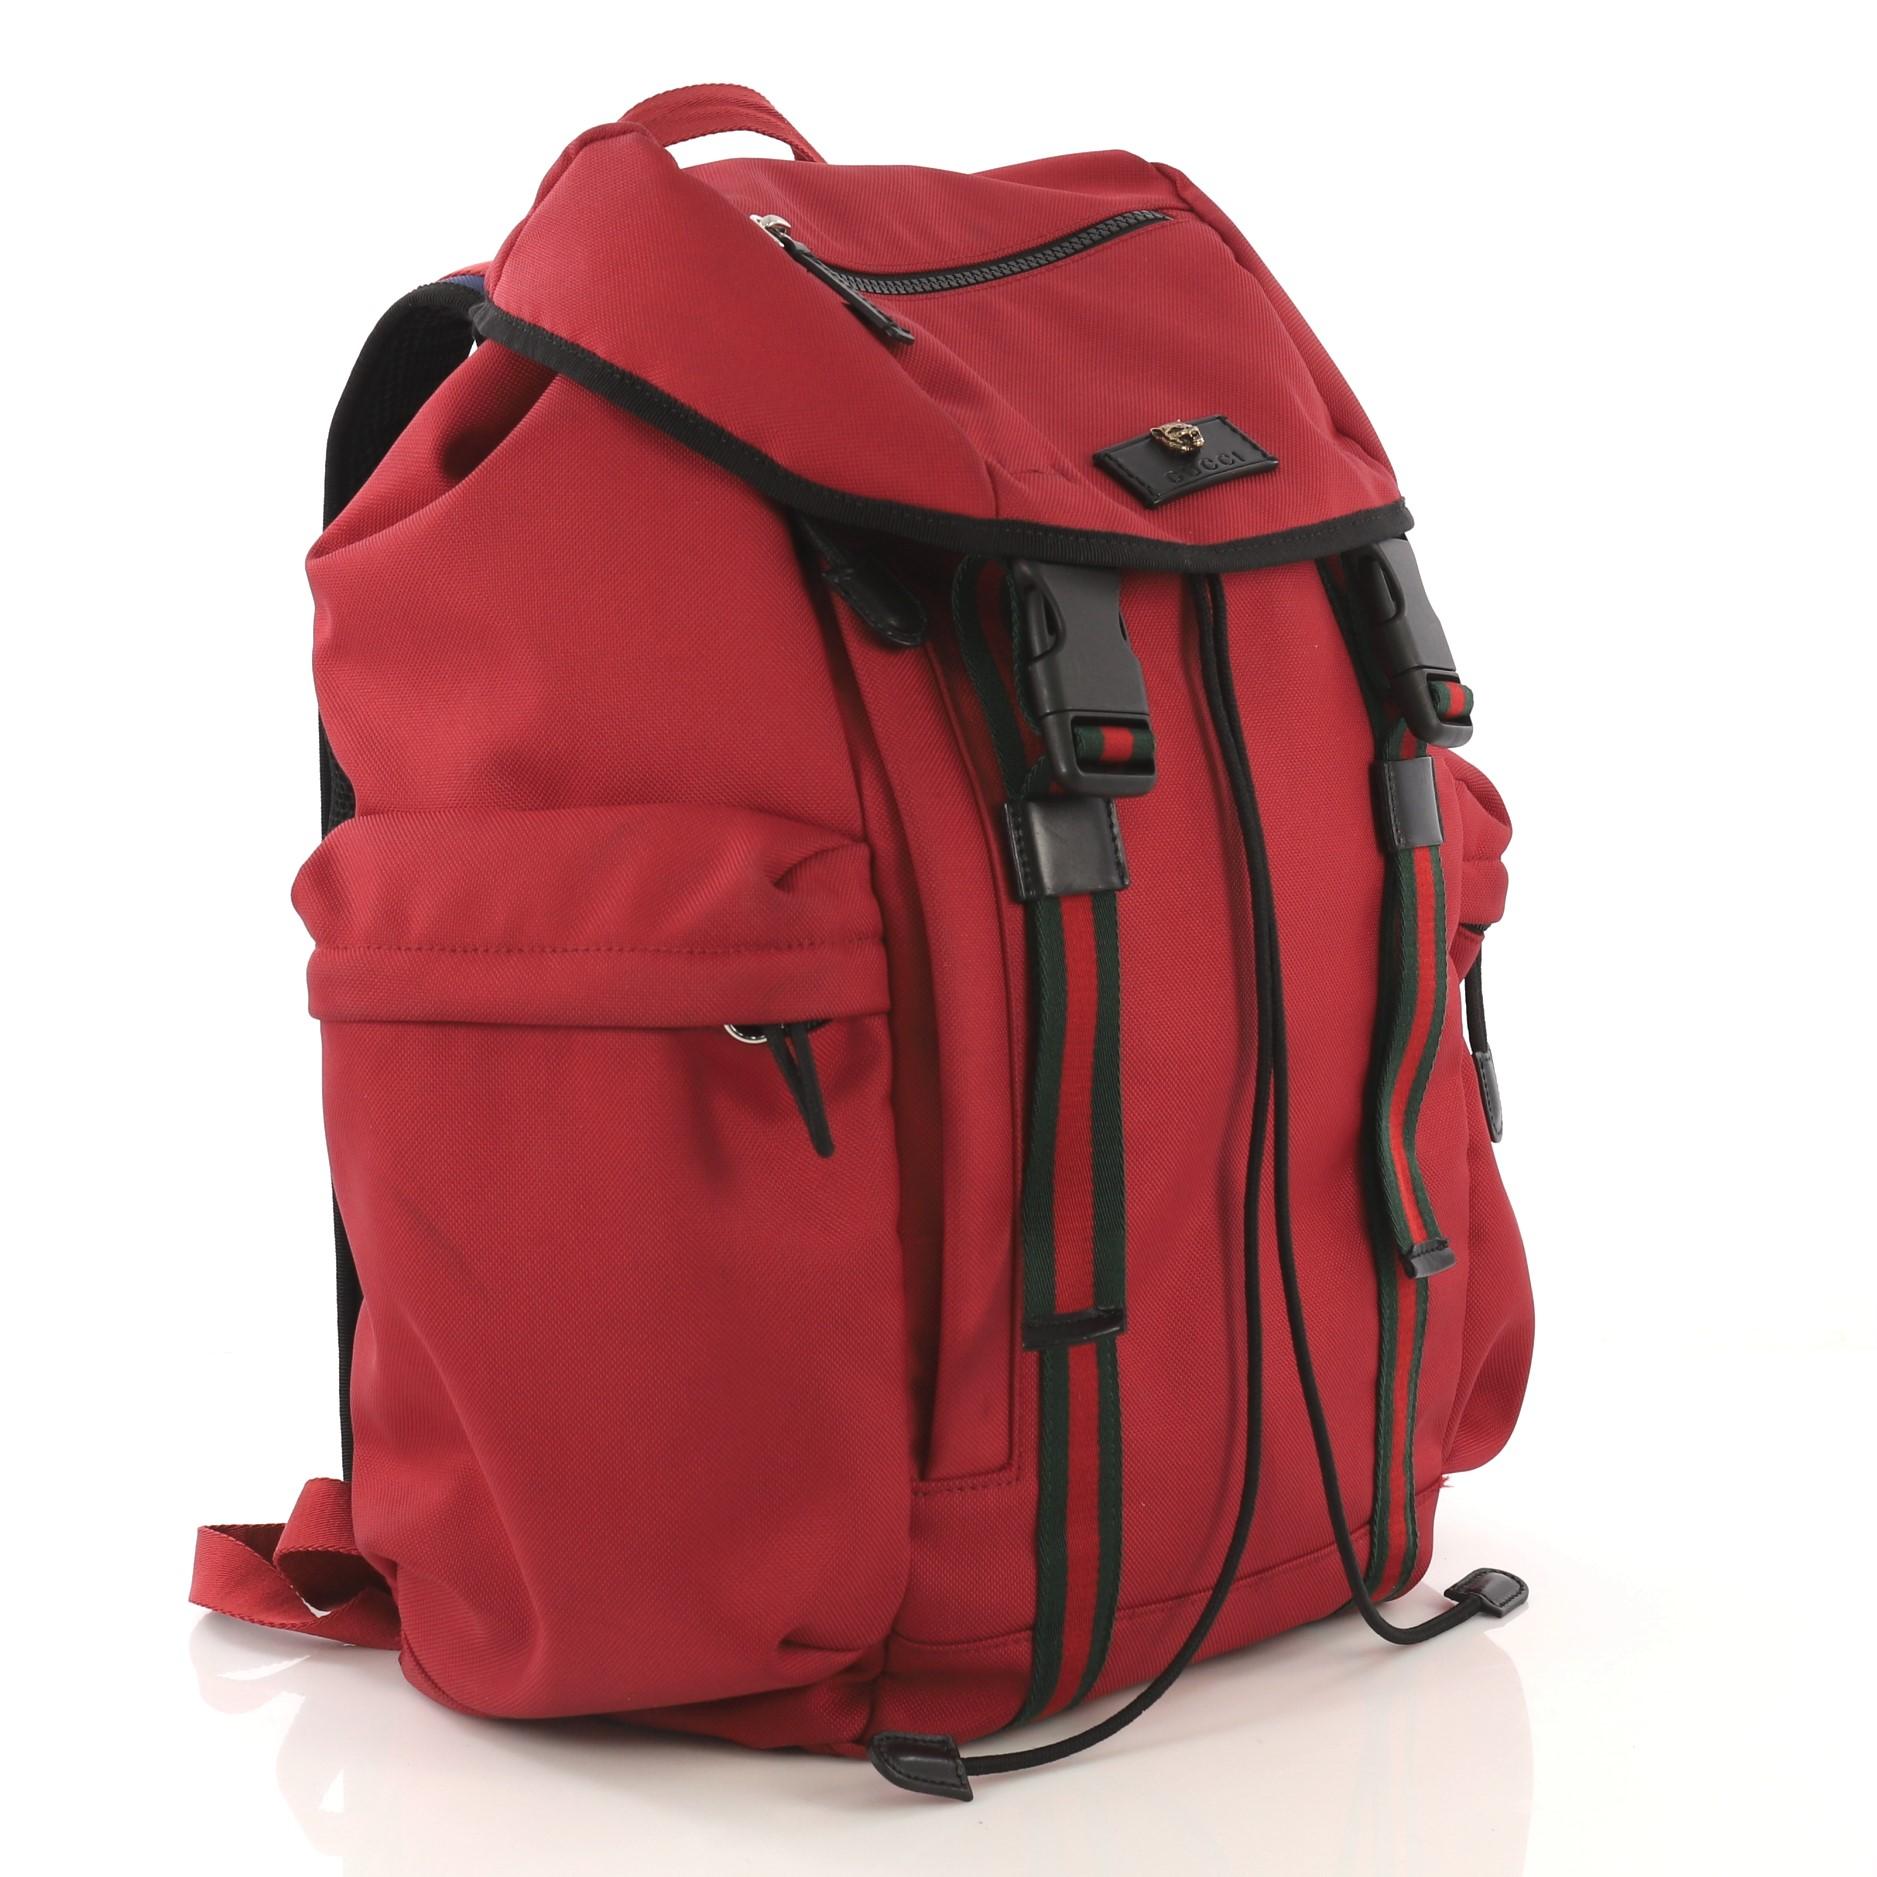 This Gucci Techpack Backpack Techno Canvas, crafted from red canvas, features Web shoulder straps, Web adjustable front straps with plastic buckles, exterior zip pockets, Gucci tag with metal feline detail, and silver-tone hardware. Its drawstring